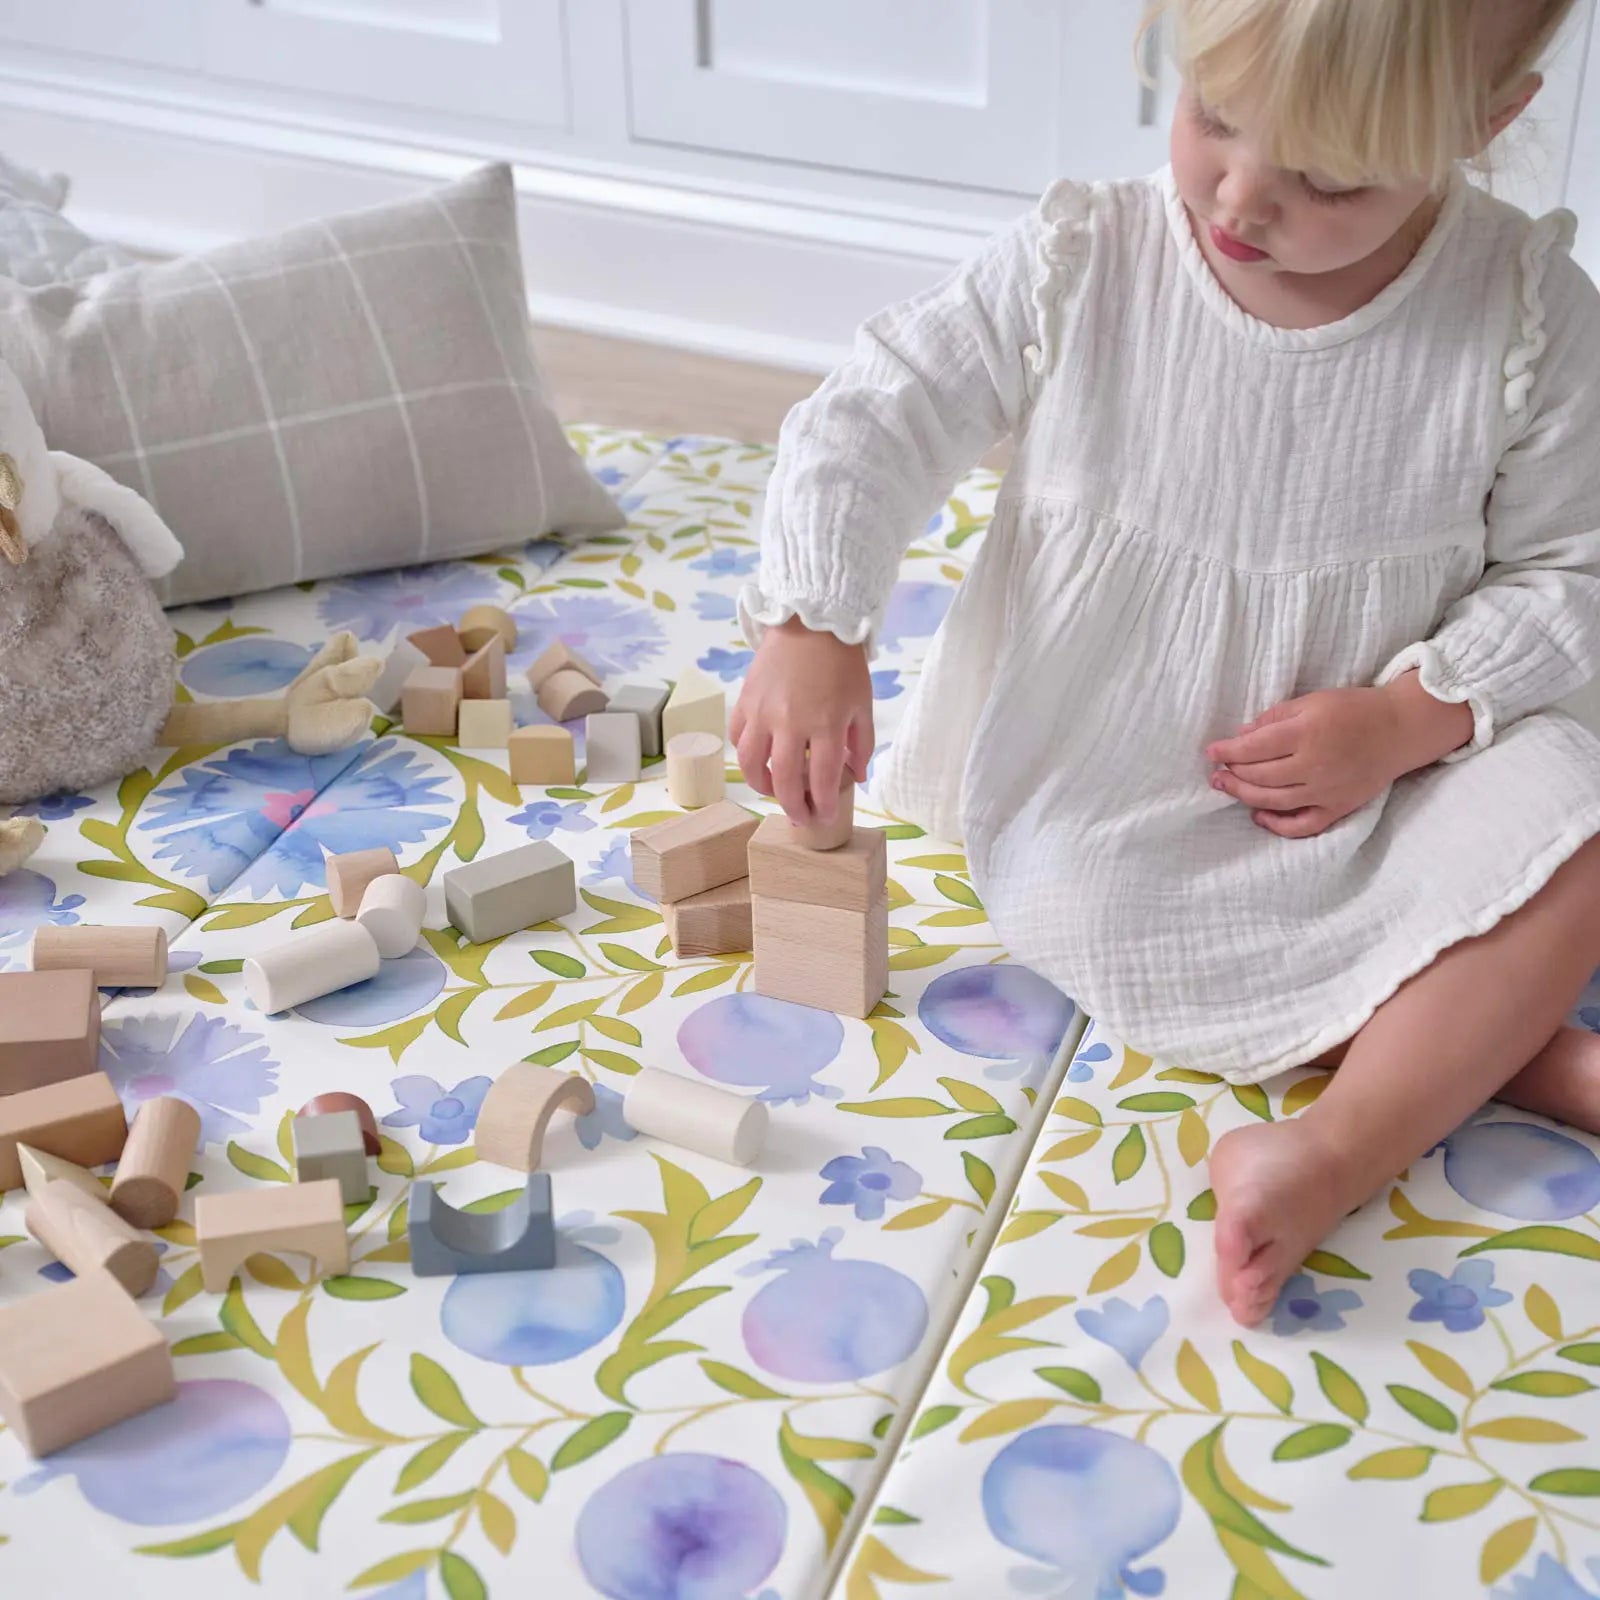 Bluebell blue green and white floral tumbling mat with toddler girl sitting on the mat next to pillows and a plush toy playing with wooden blocks